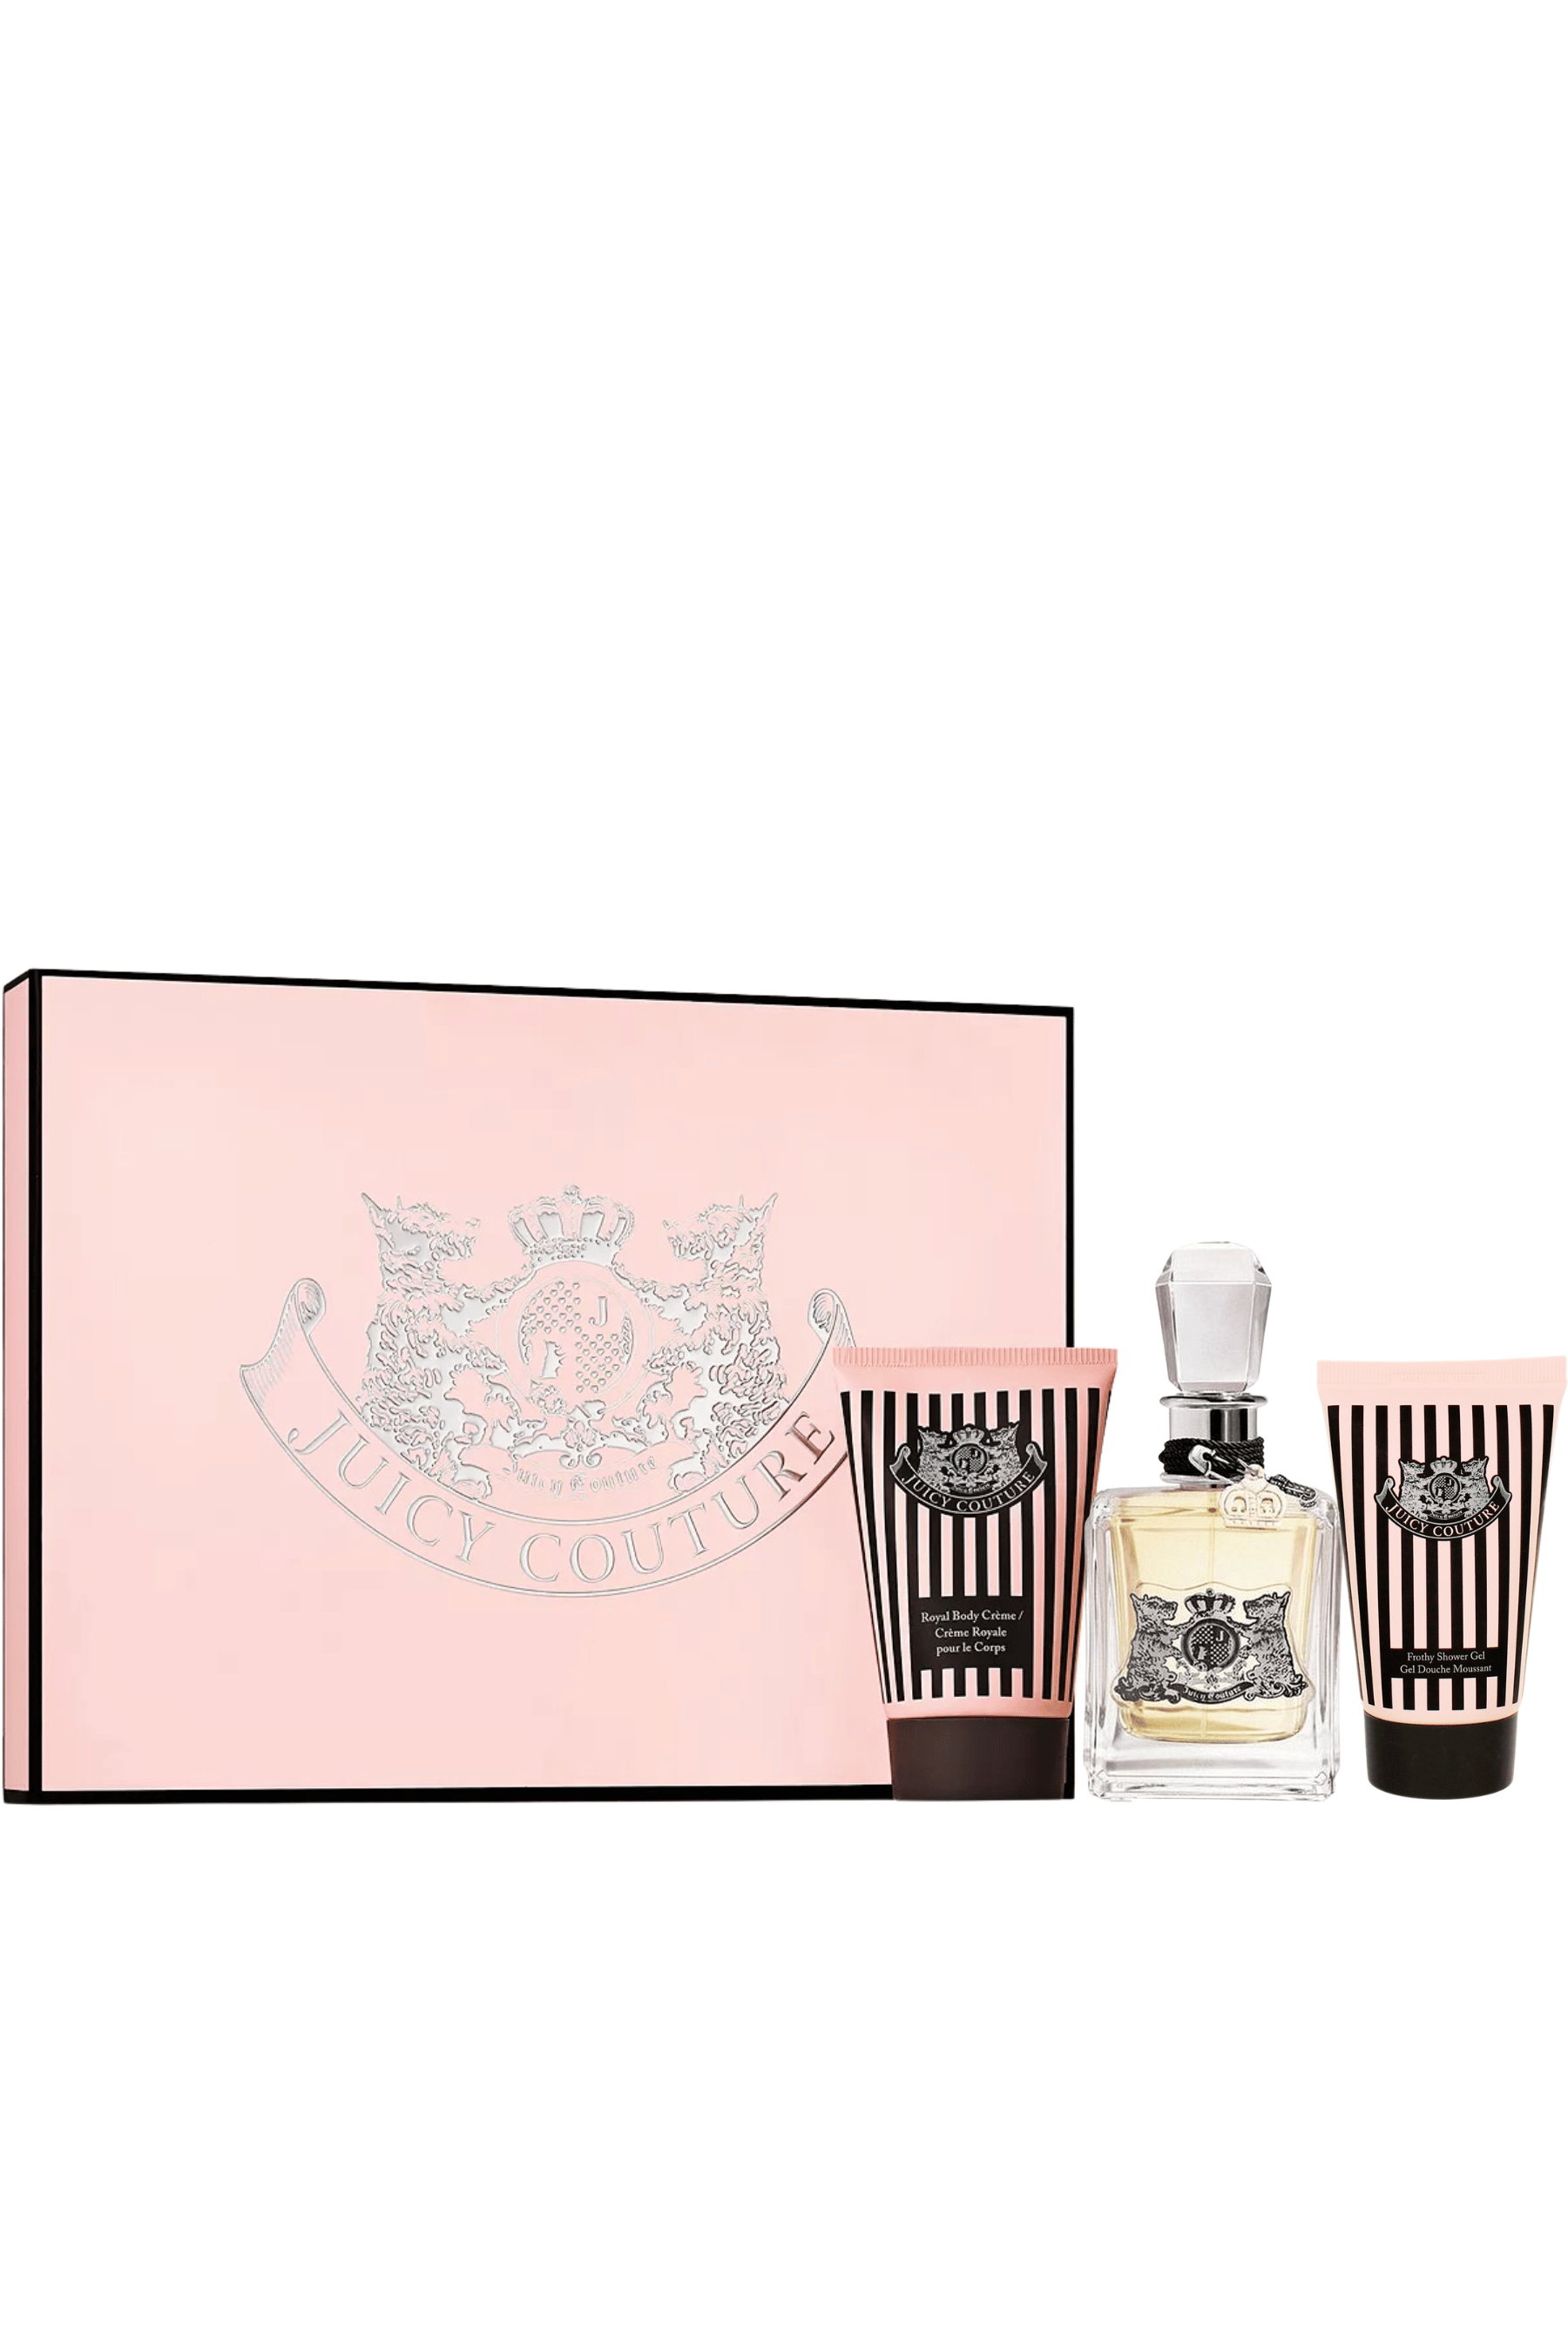 Juicy Couture by Juicy Couture for Women 3 Piece Gift Set